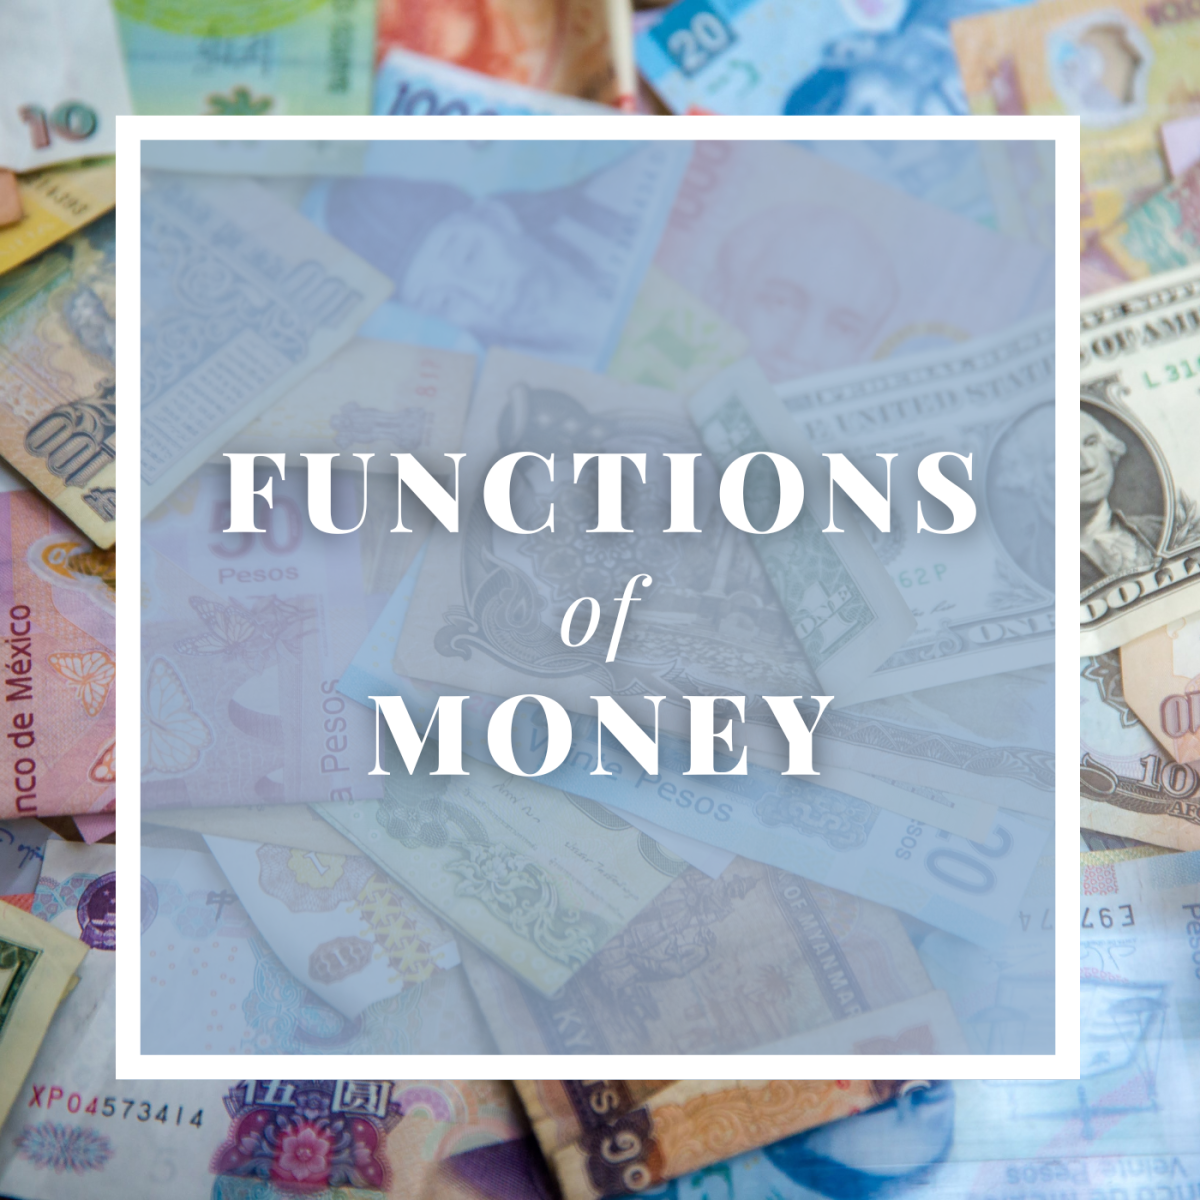 Functions of Money in the Modern Economic System